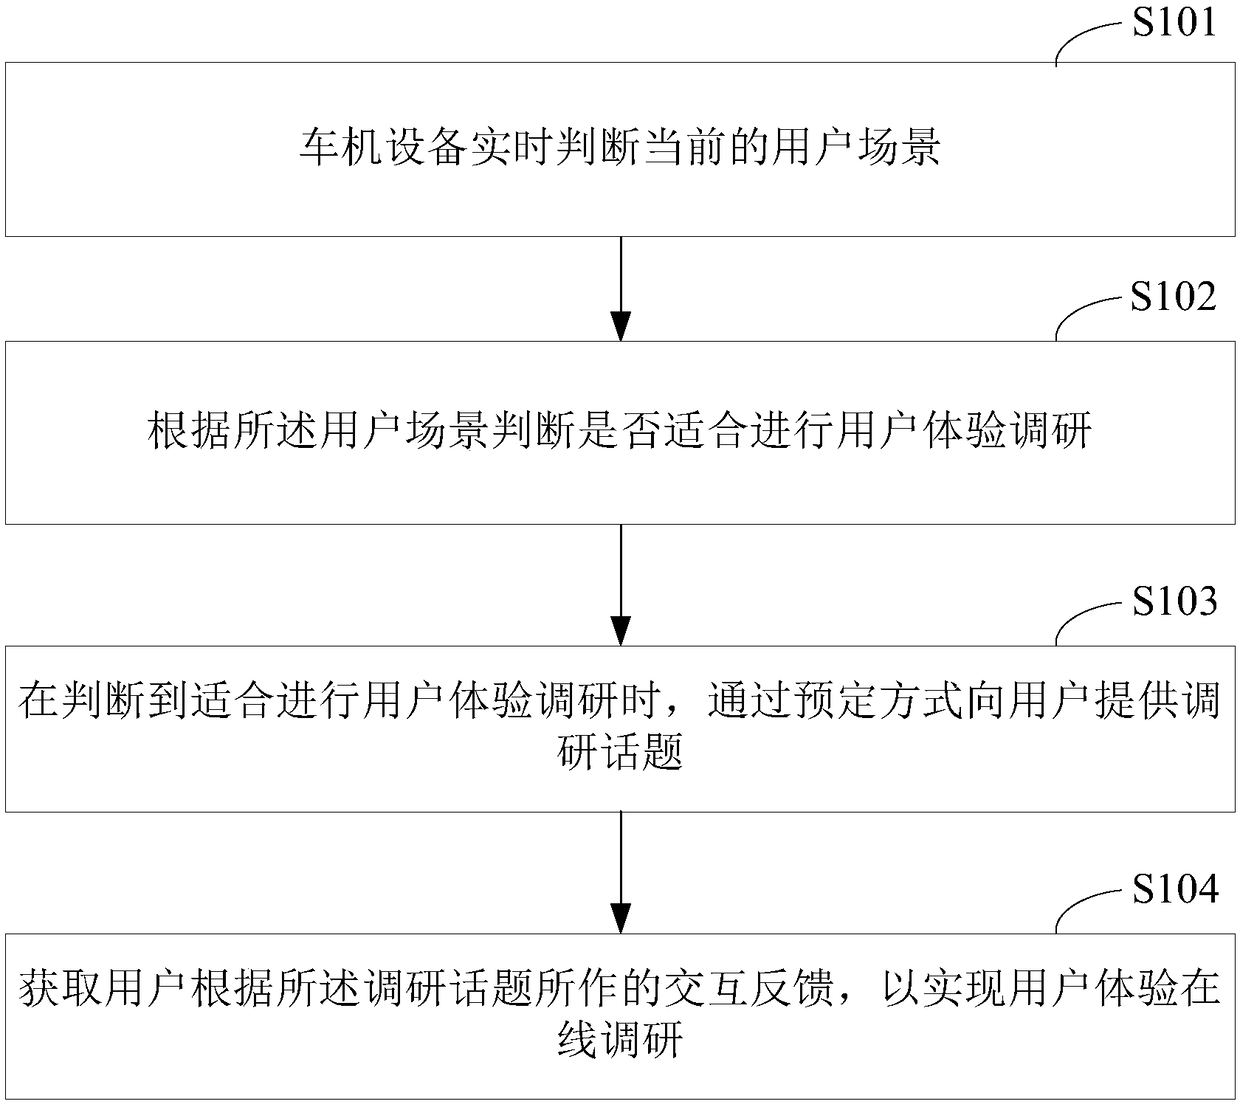 Vehicle, Vehicle and Machine Equipment and Online Survey Method of User Experience Based on Scenario Analysis